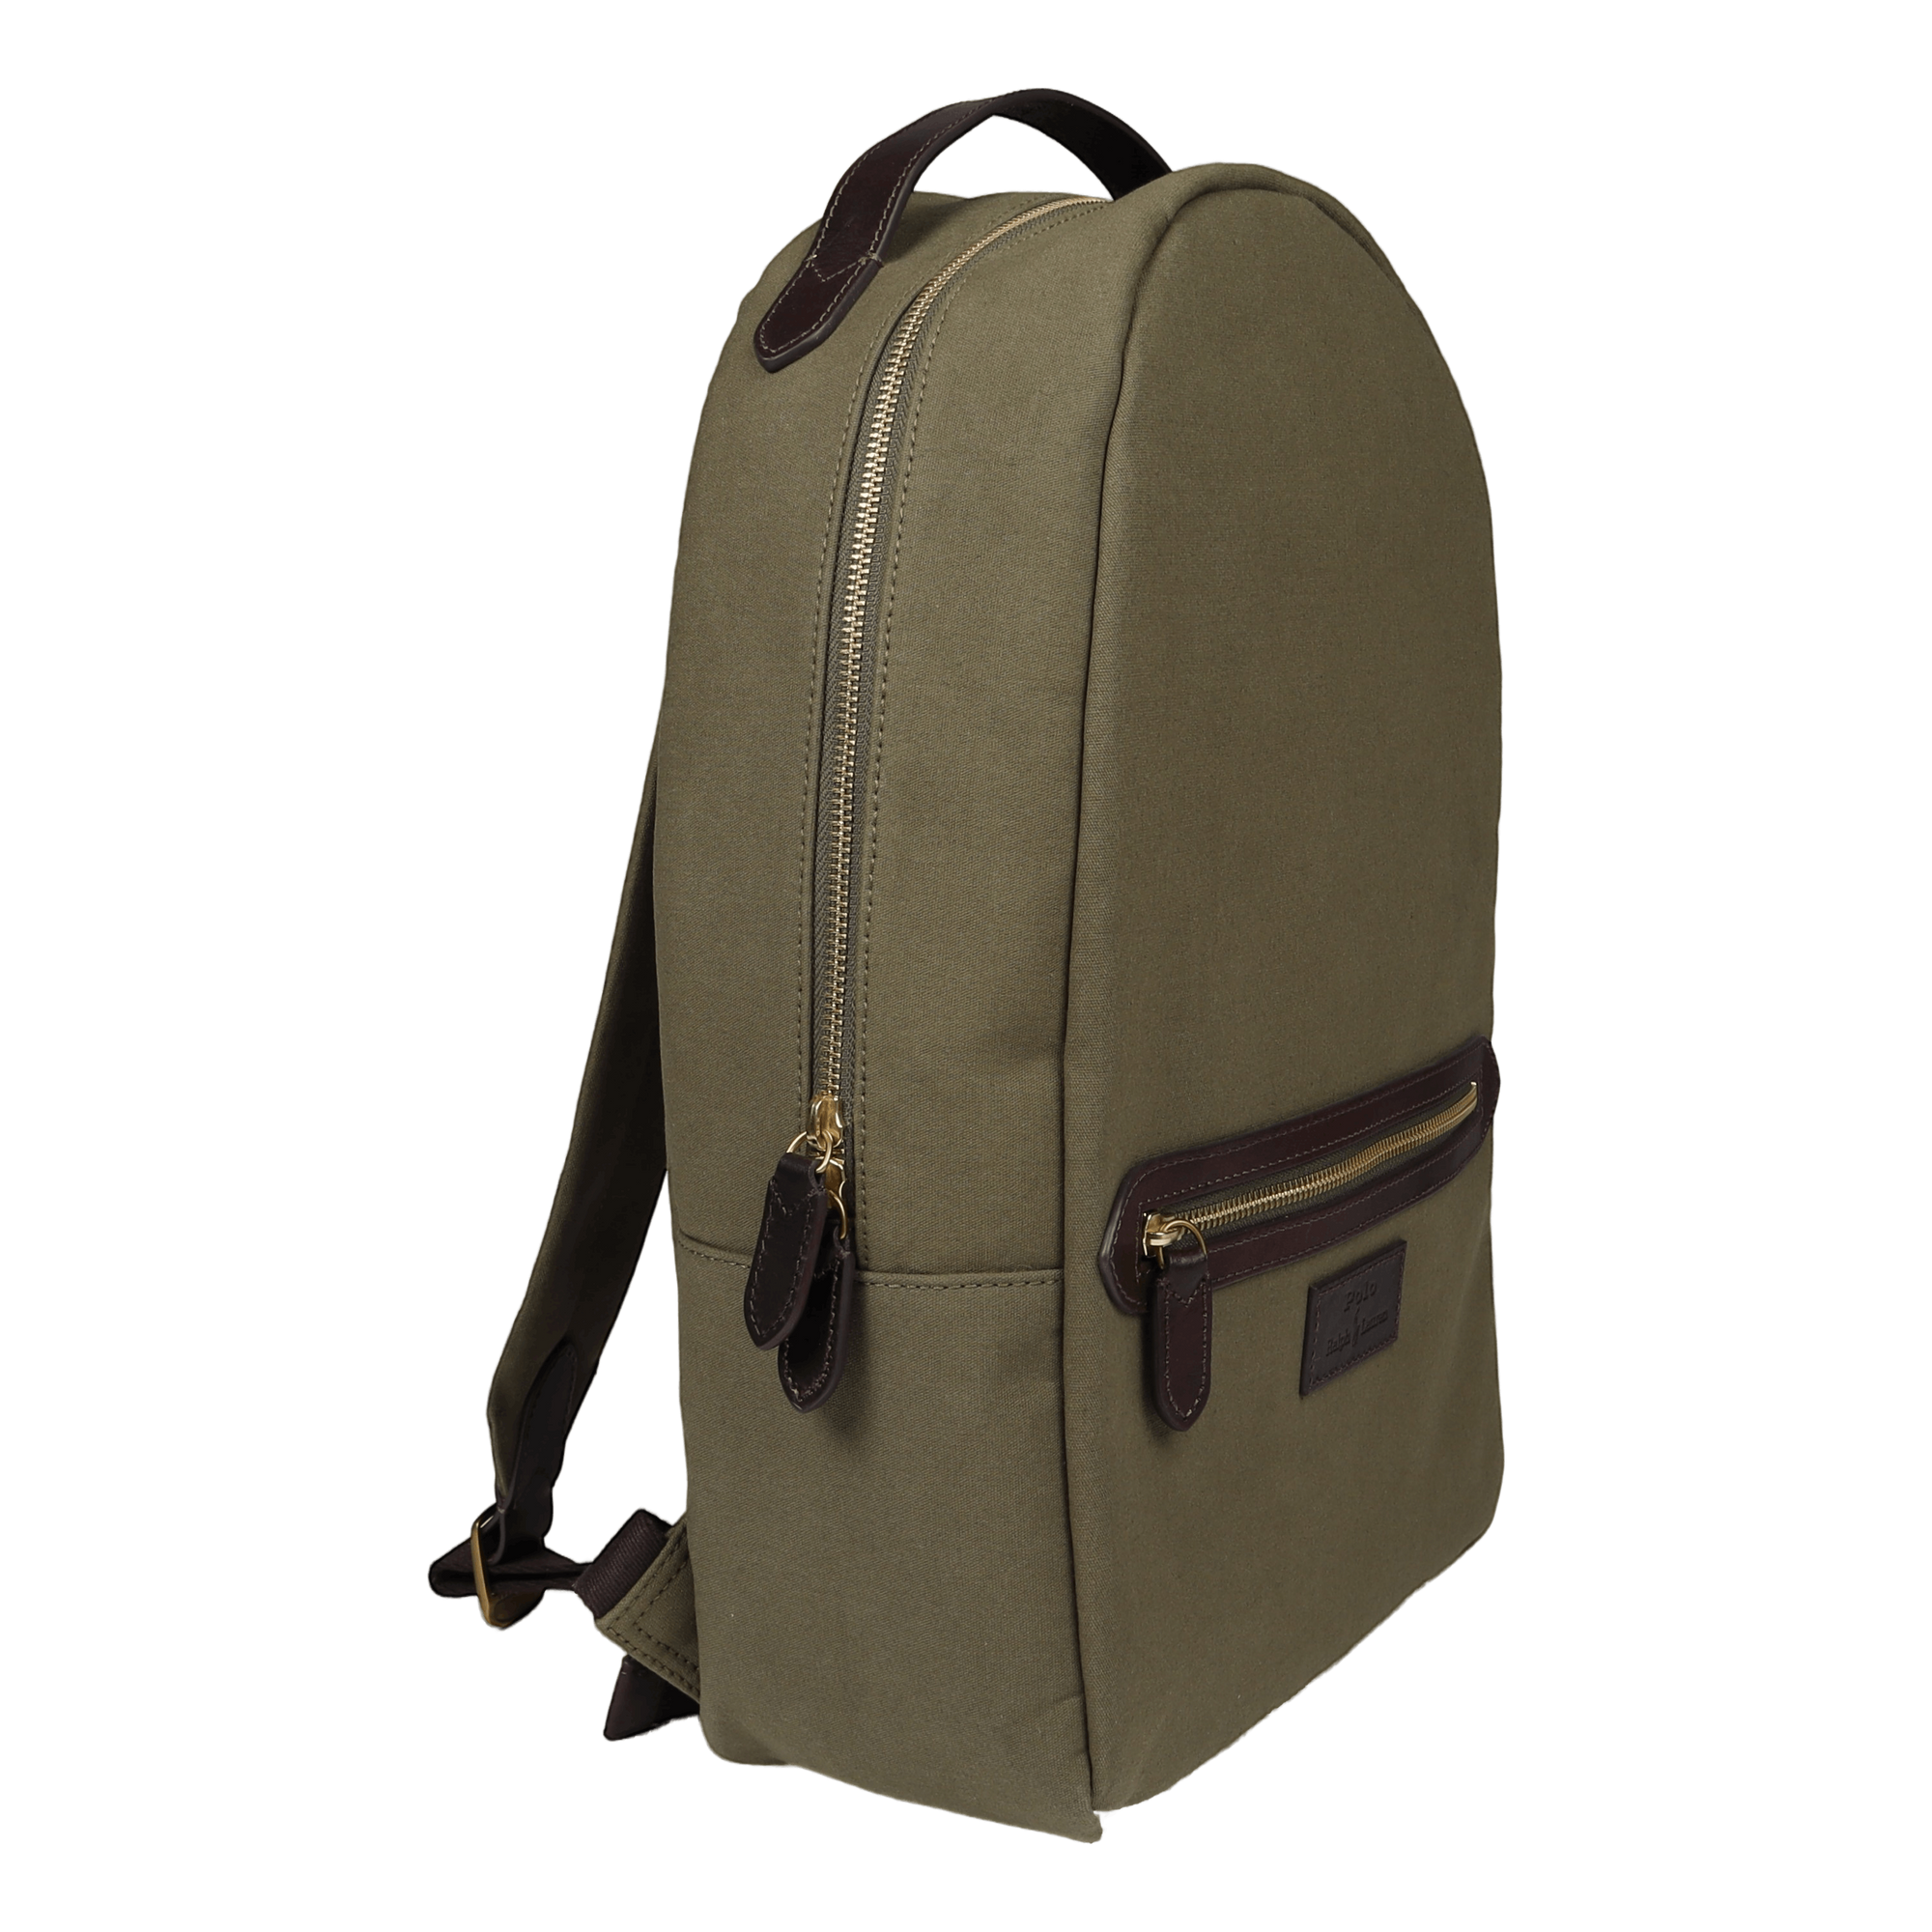 Polo Ralph Lauren Leather-Trim Canvas Backpack